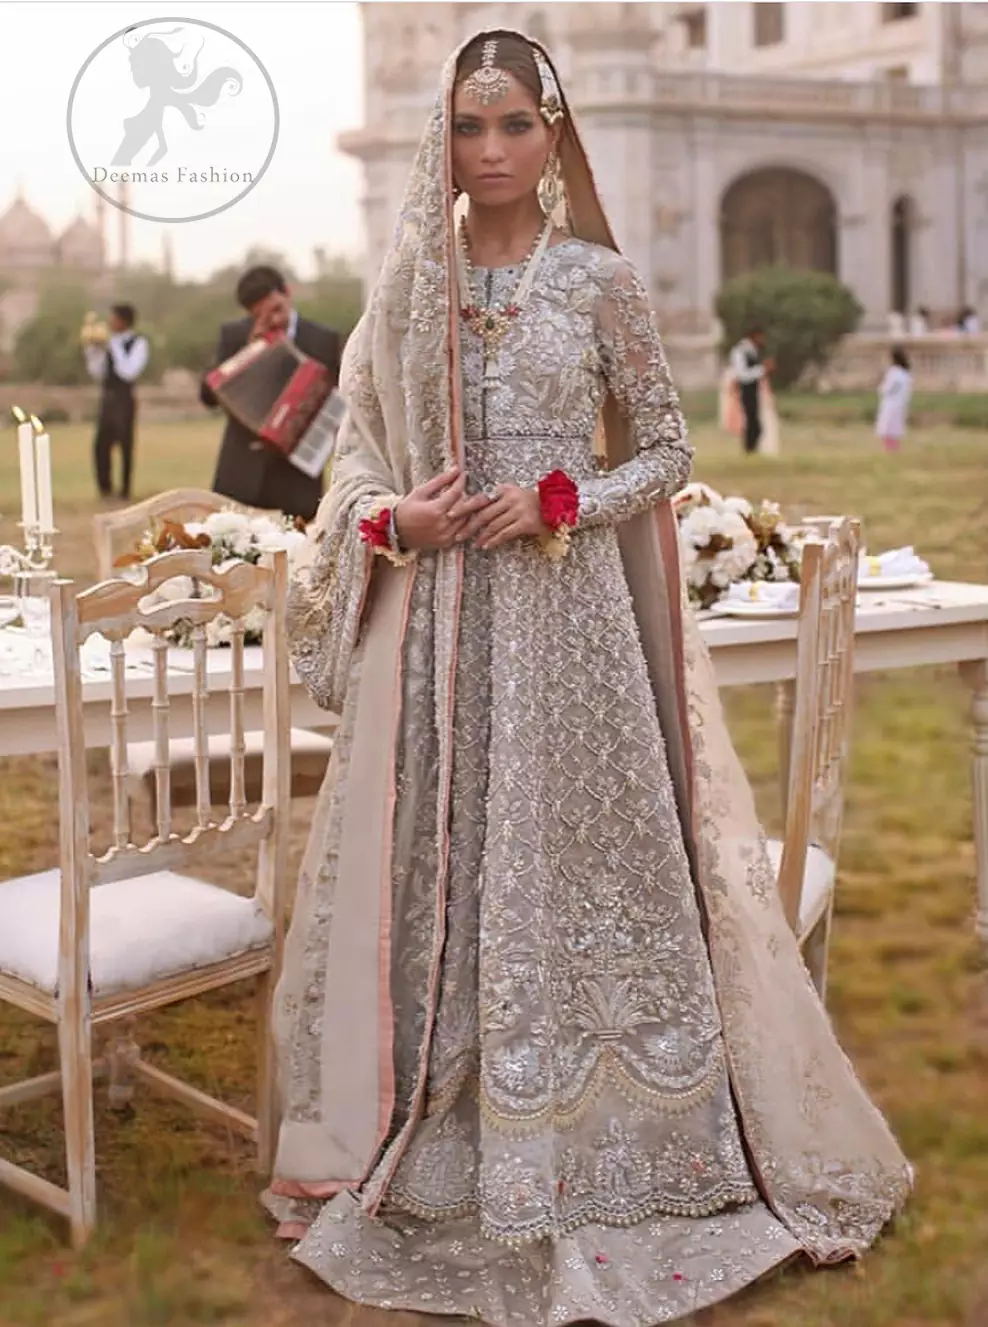 This outfit is a timeless beauty.It is heavily embellished with silver gold kora dabka, Sequins and swaronski crystals.This exquisite Pishwas is fully decorated with floral motifs patterns all over it.It is further enhanced with Foral thread embroidery.The trimming border of pishwas is ornamented with small golden pearls. It comes with embellished lehengha which has small sized sprinkled floral motifs all over.This Outfit is beautifully coordinated with matching Dupatta with heavy embroidered borders.